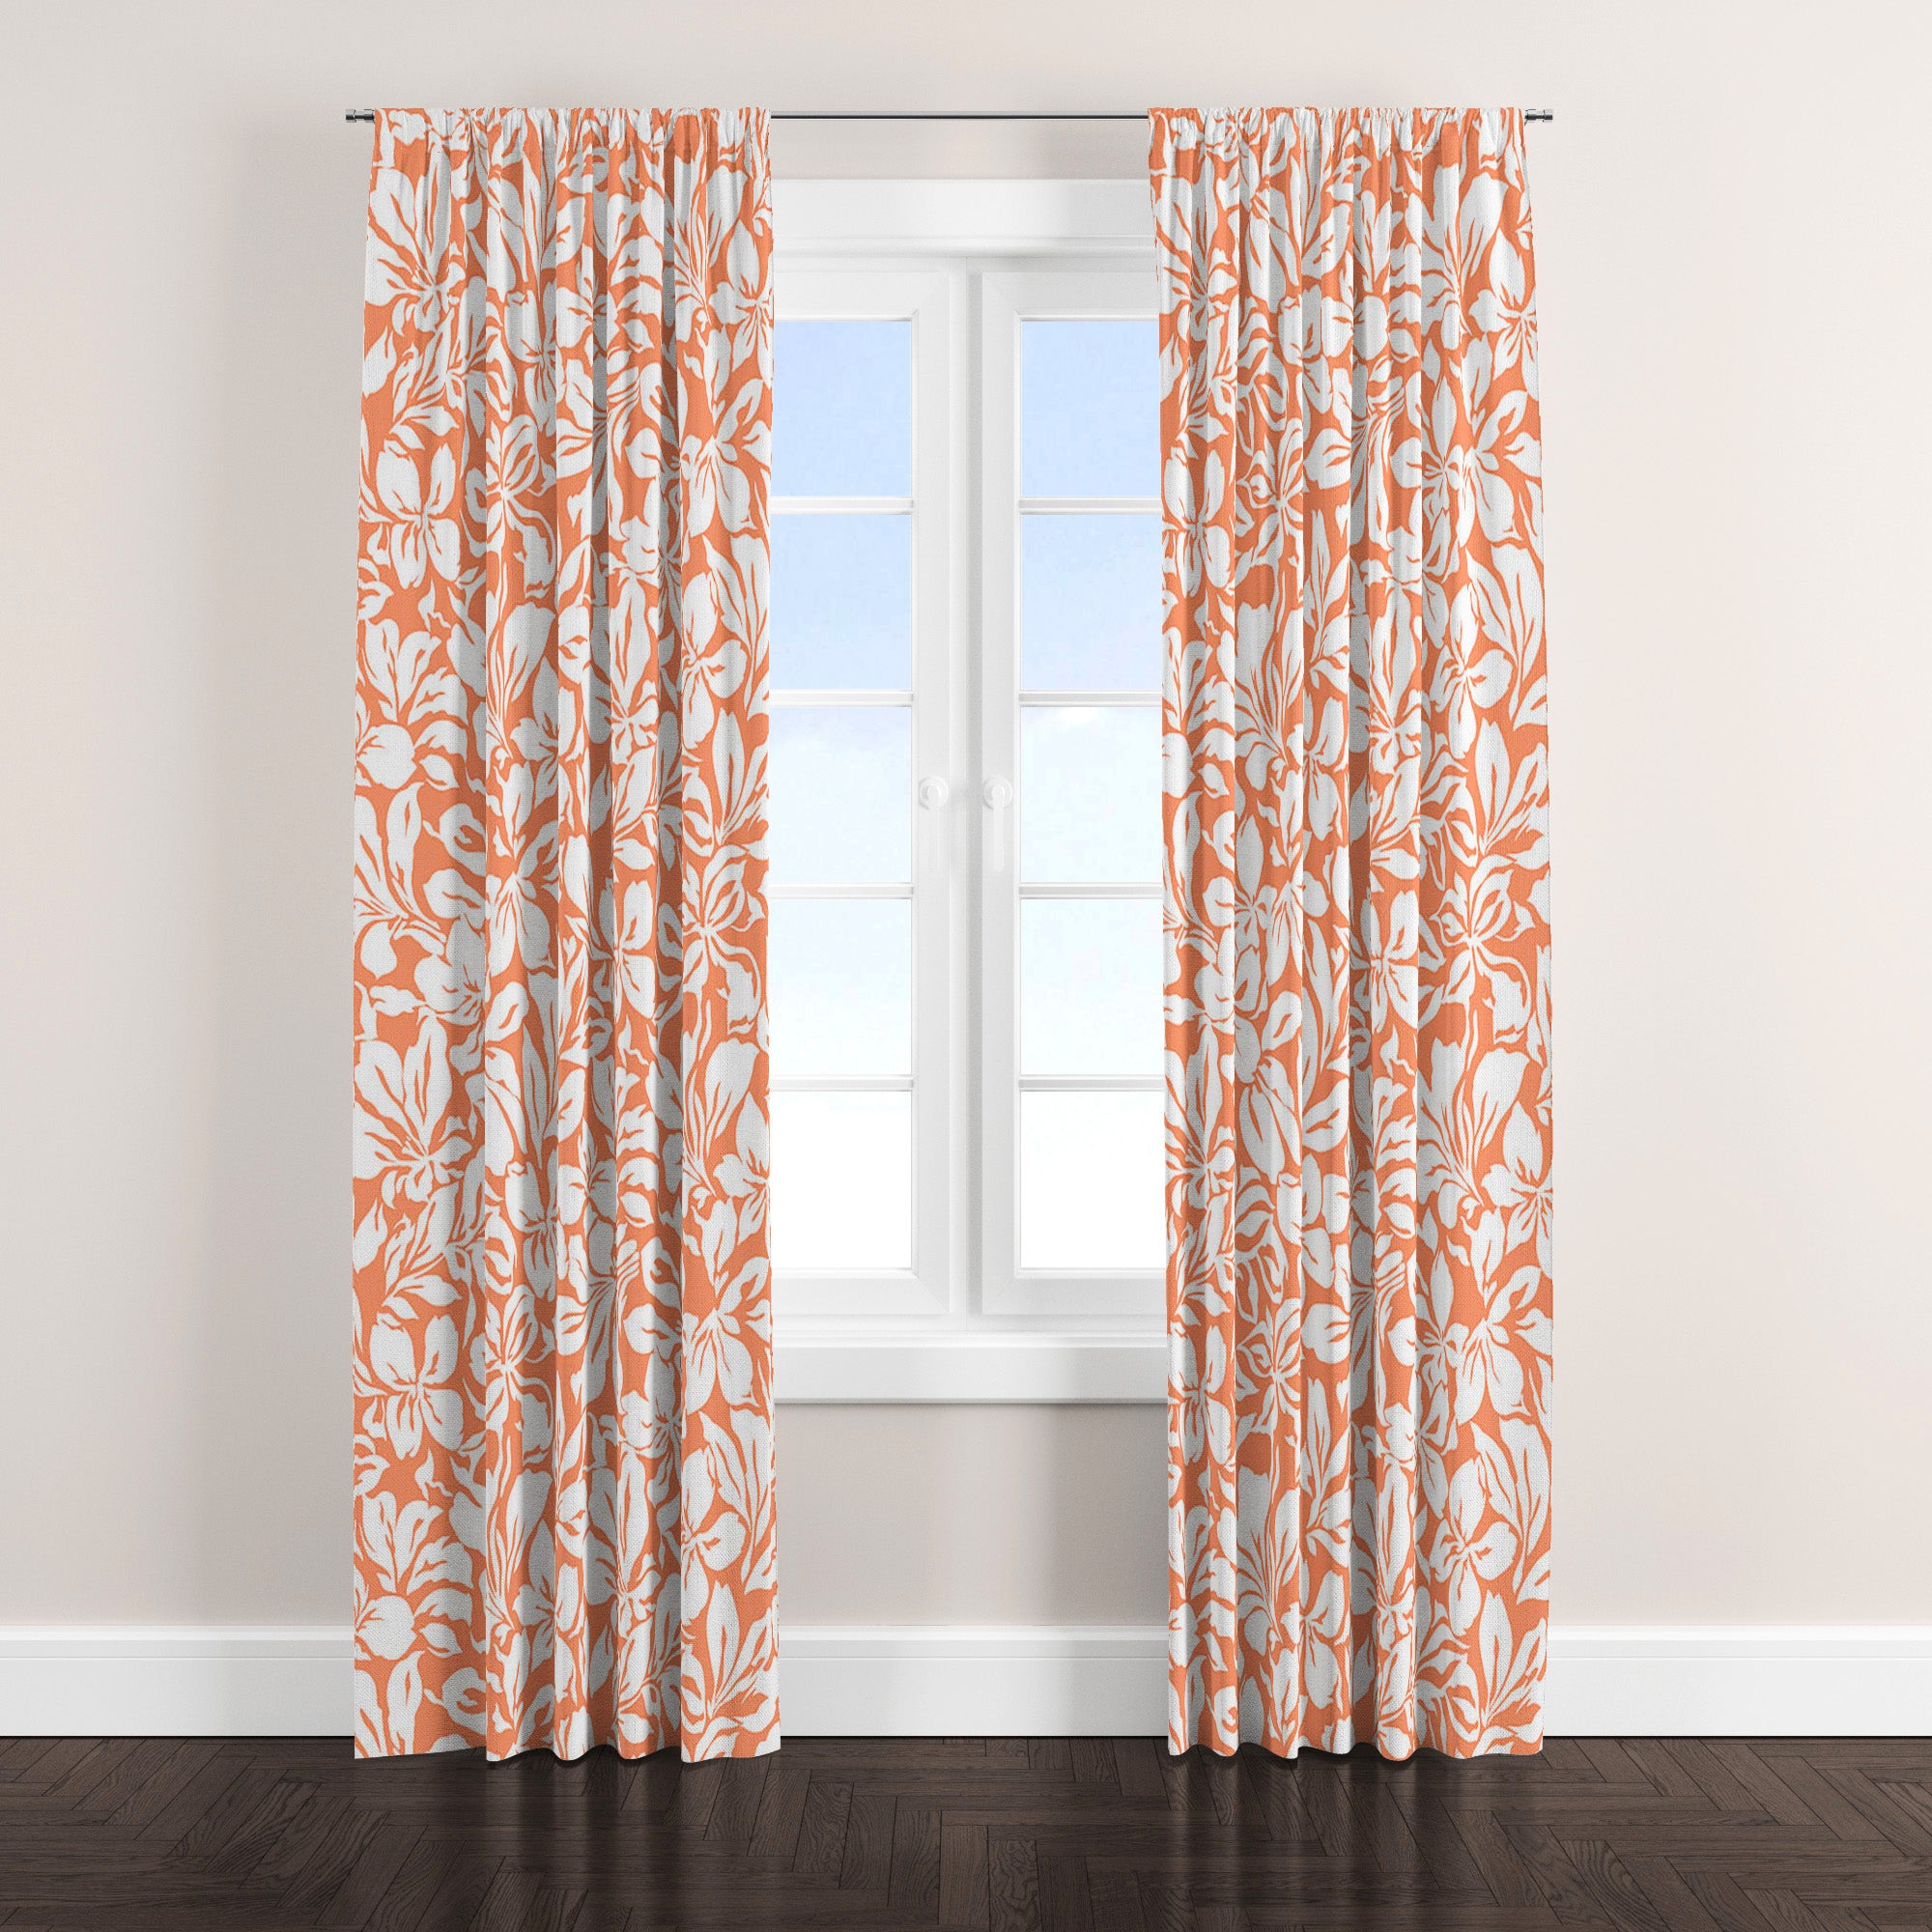 Abstract White Flowers Damask Peach Pink Floral Blackout Window Curtain CLEVA